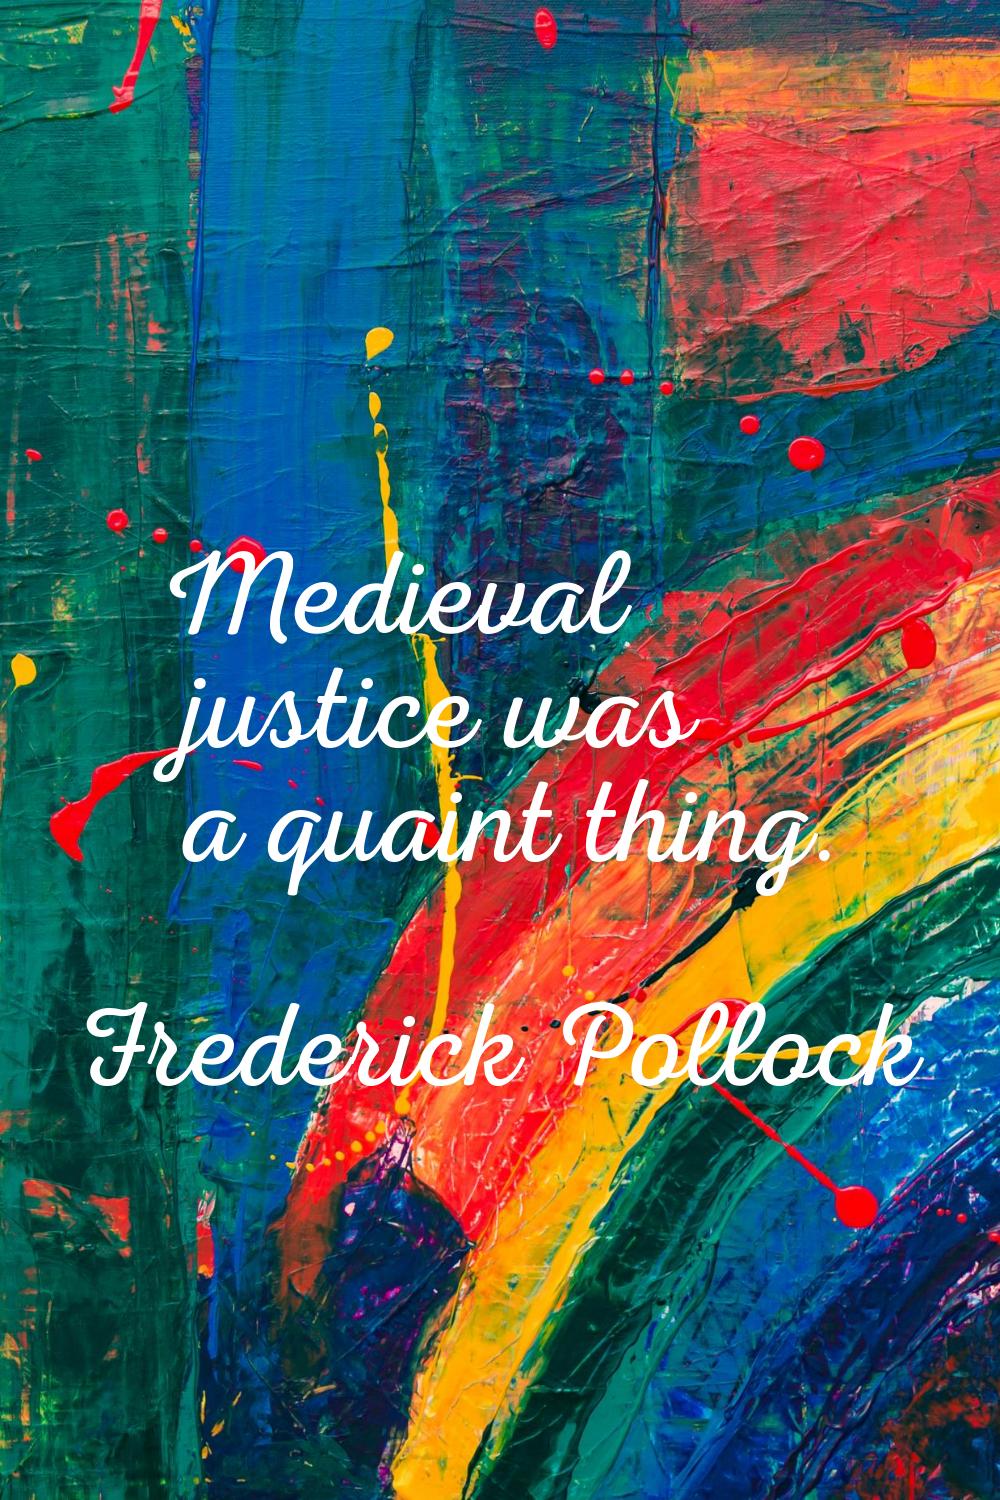 Medieval justice was a quaint thing.